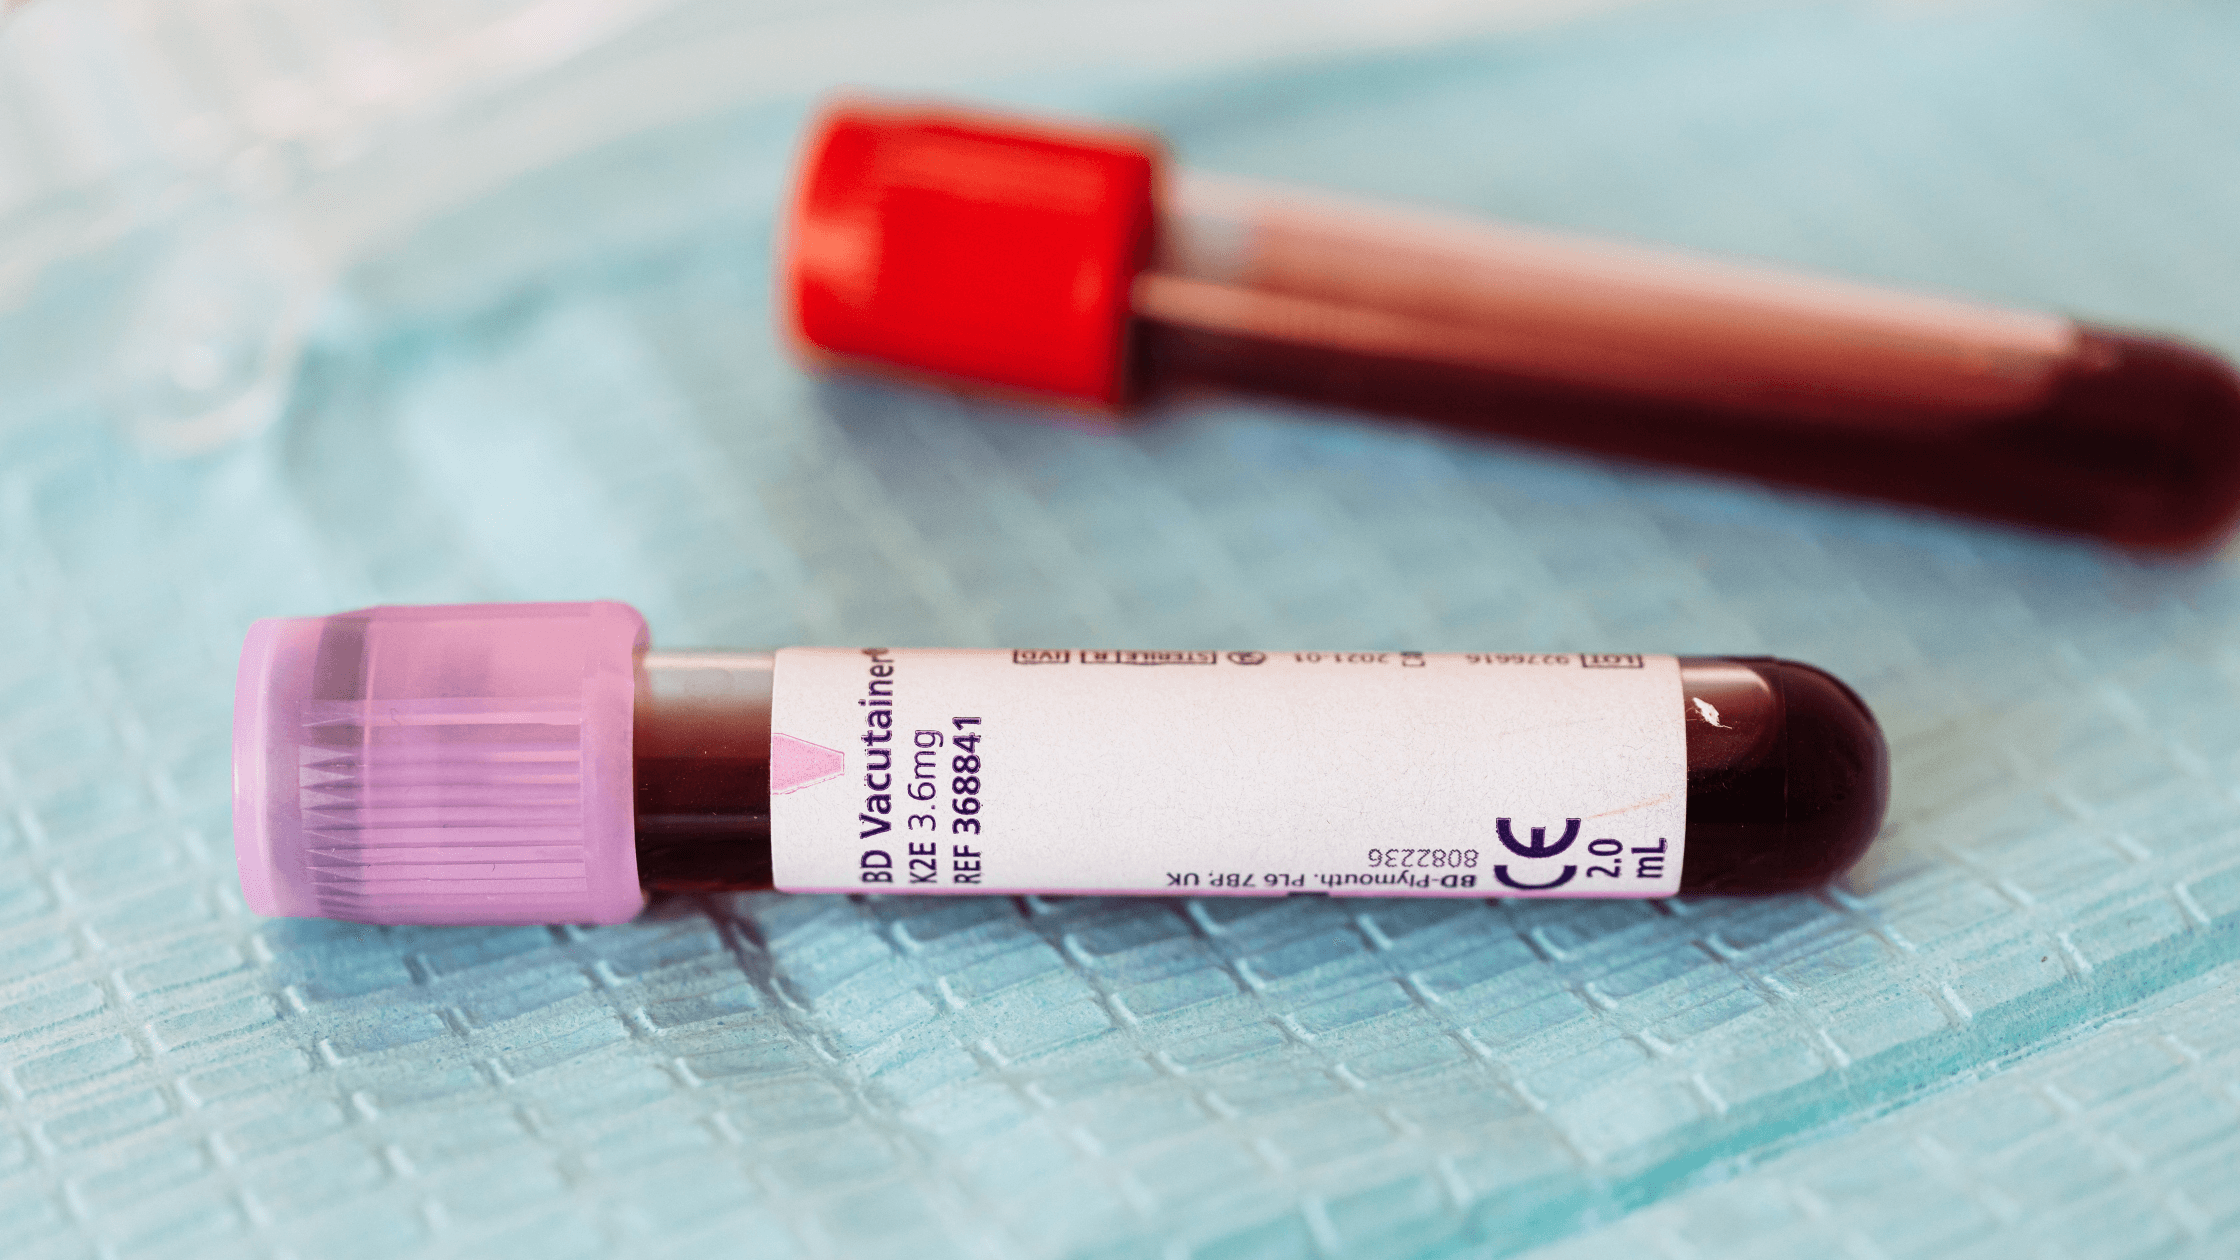 Bloodborne Pathogens Test - What You Need to Know